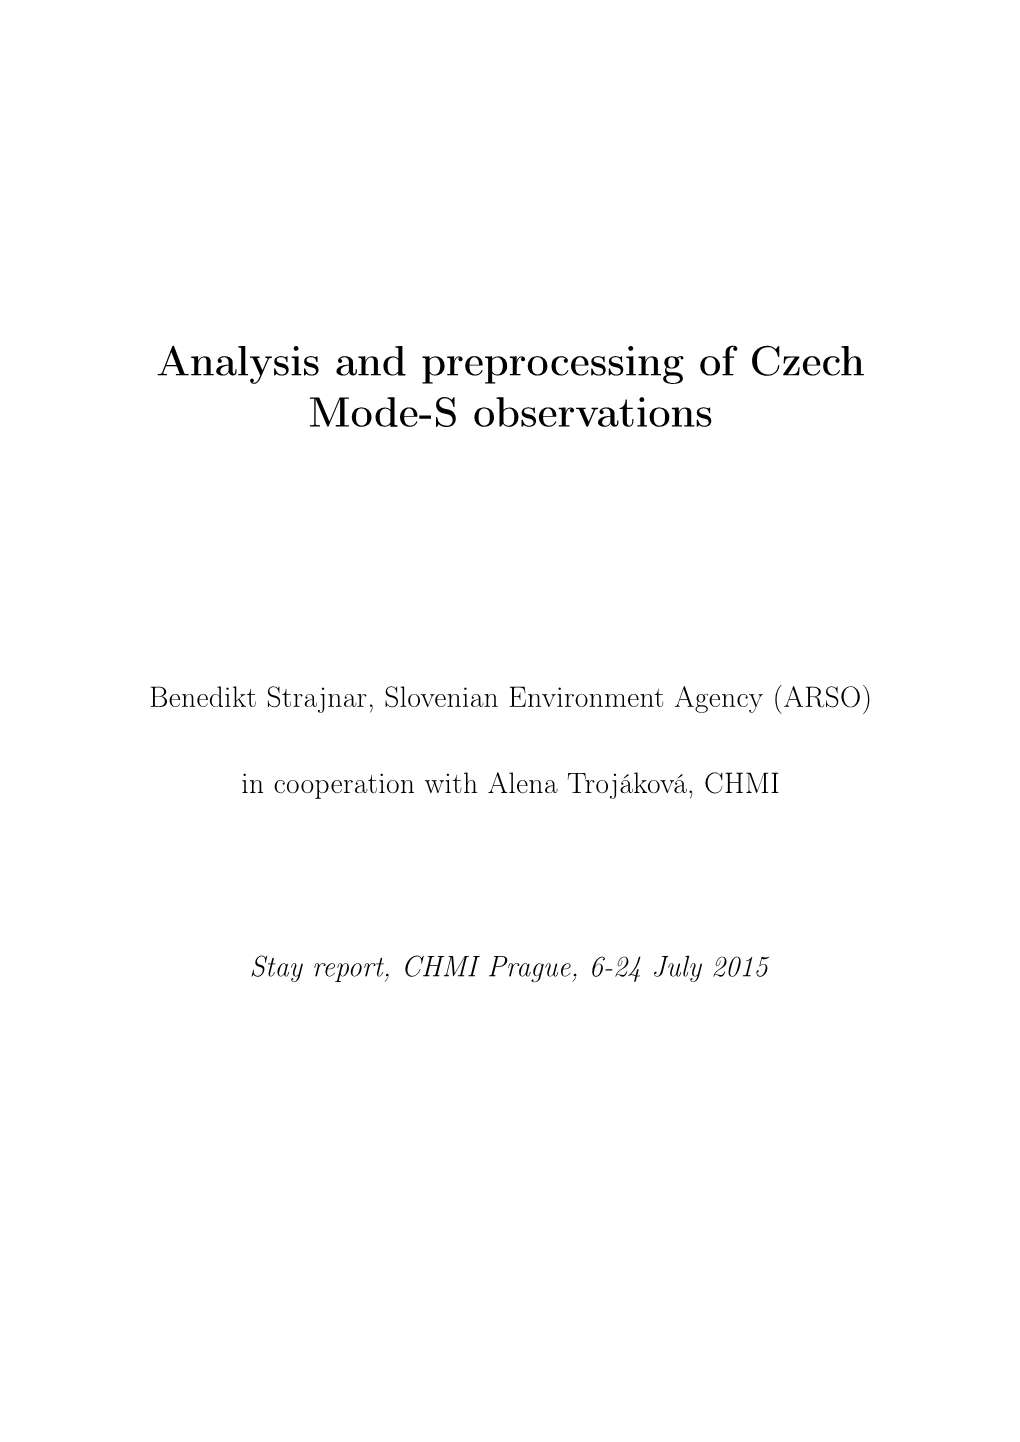 Analysis and Preprocessing of Czech Mode-S Observations